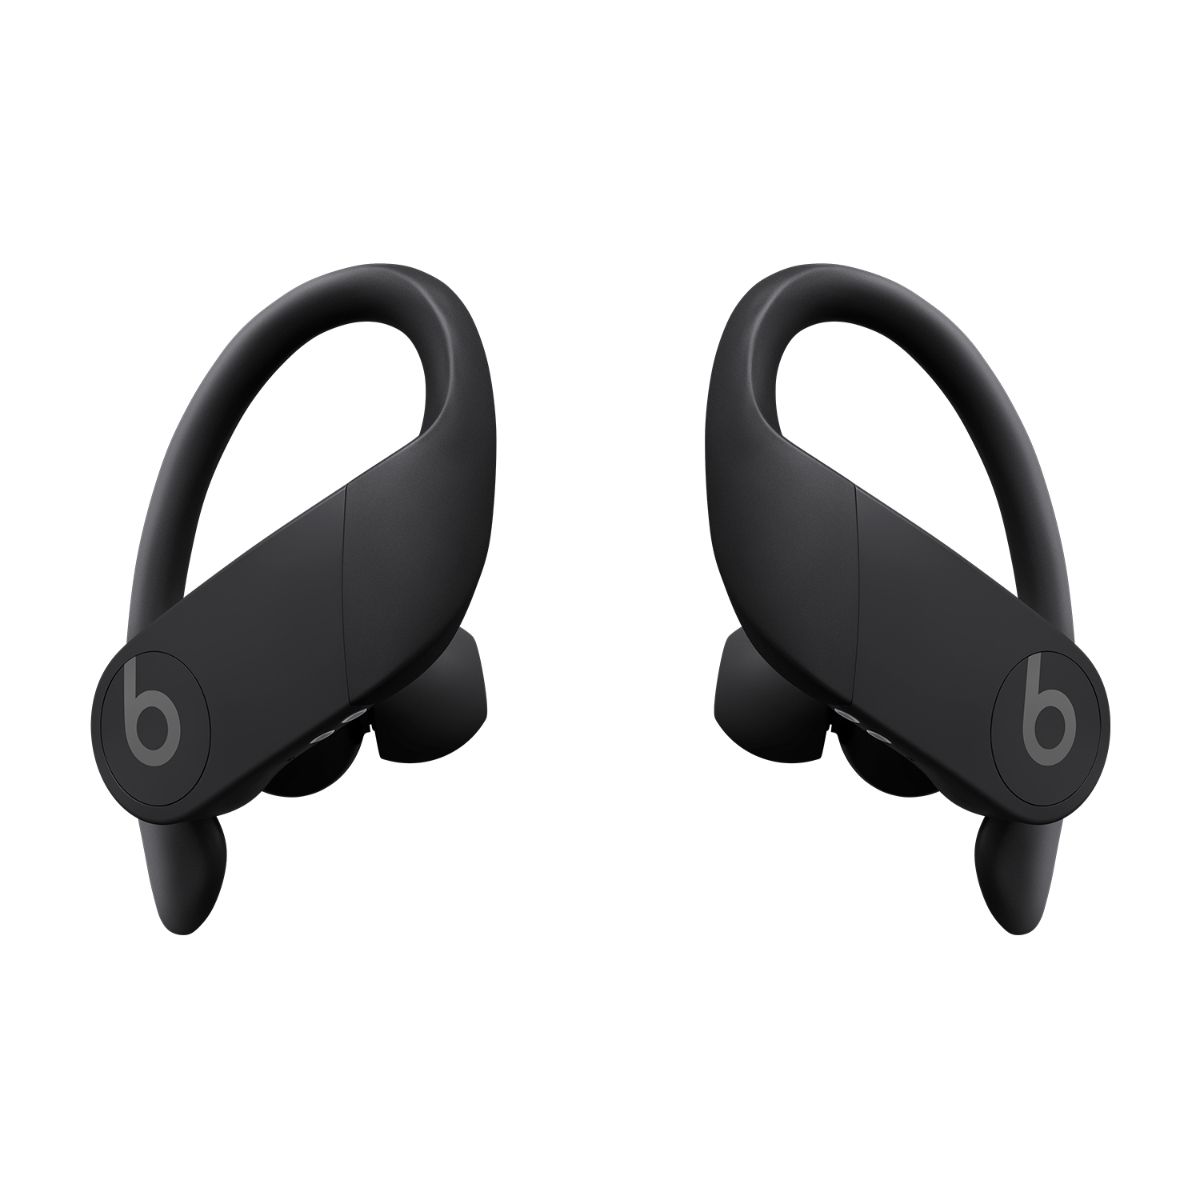 Beats powerbeats pro earbuds positioned next to one another